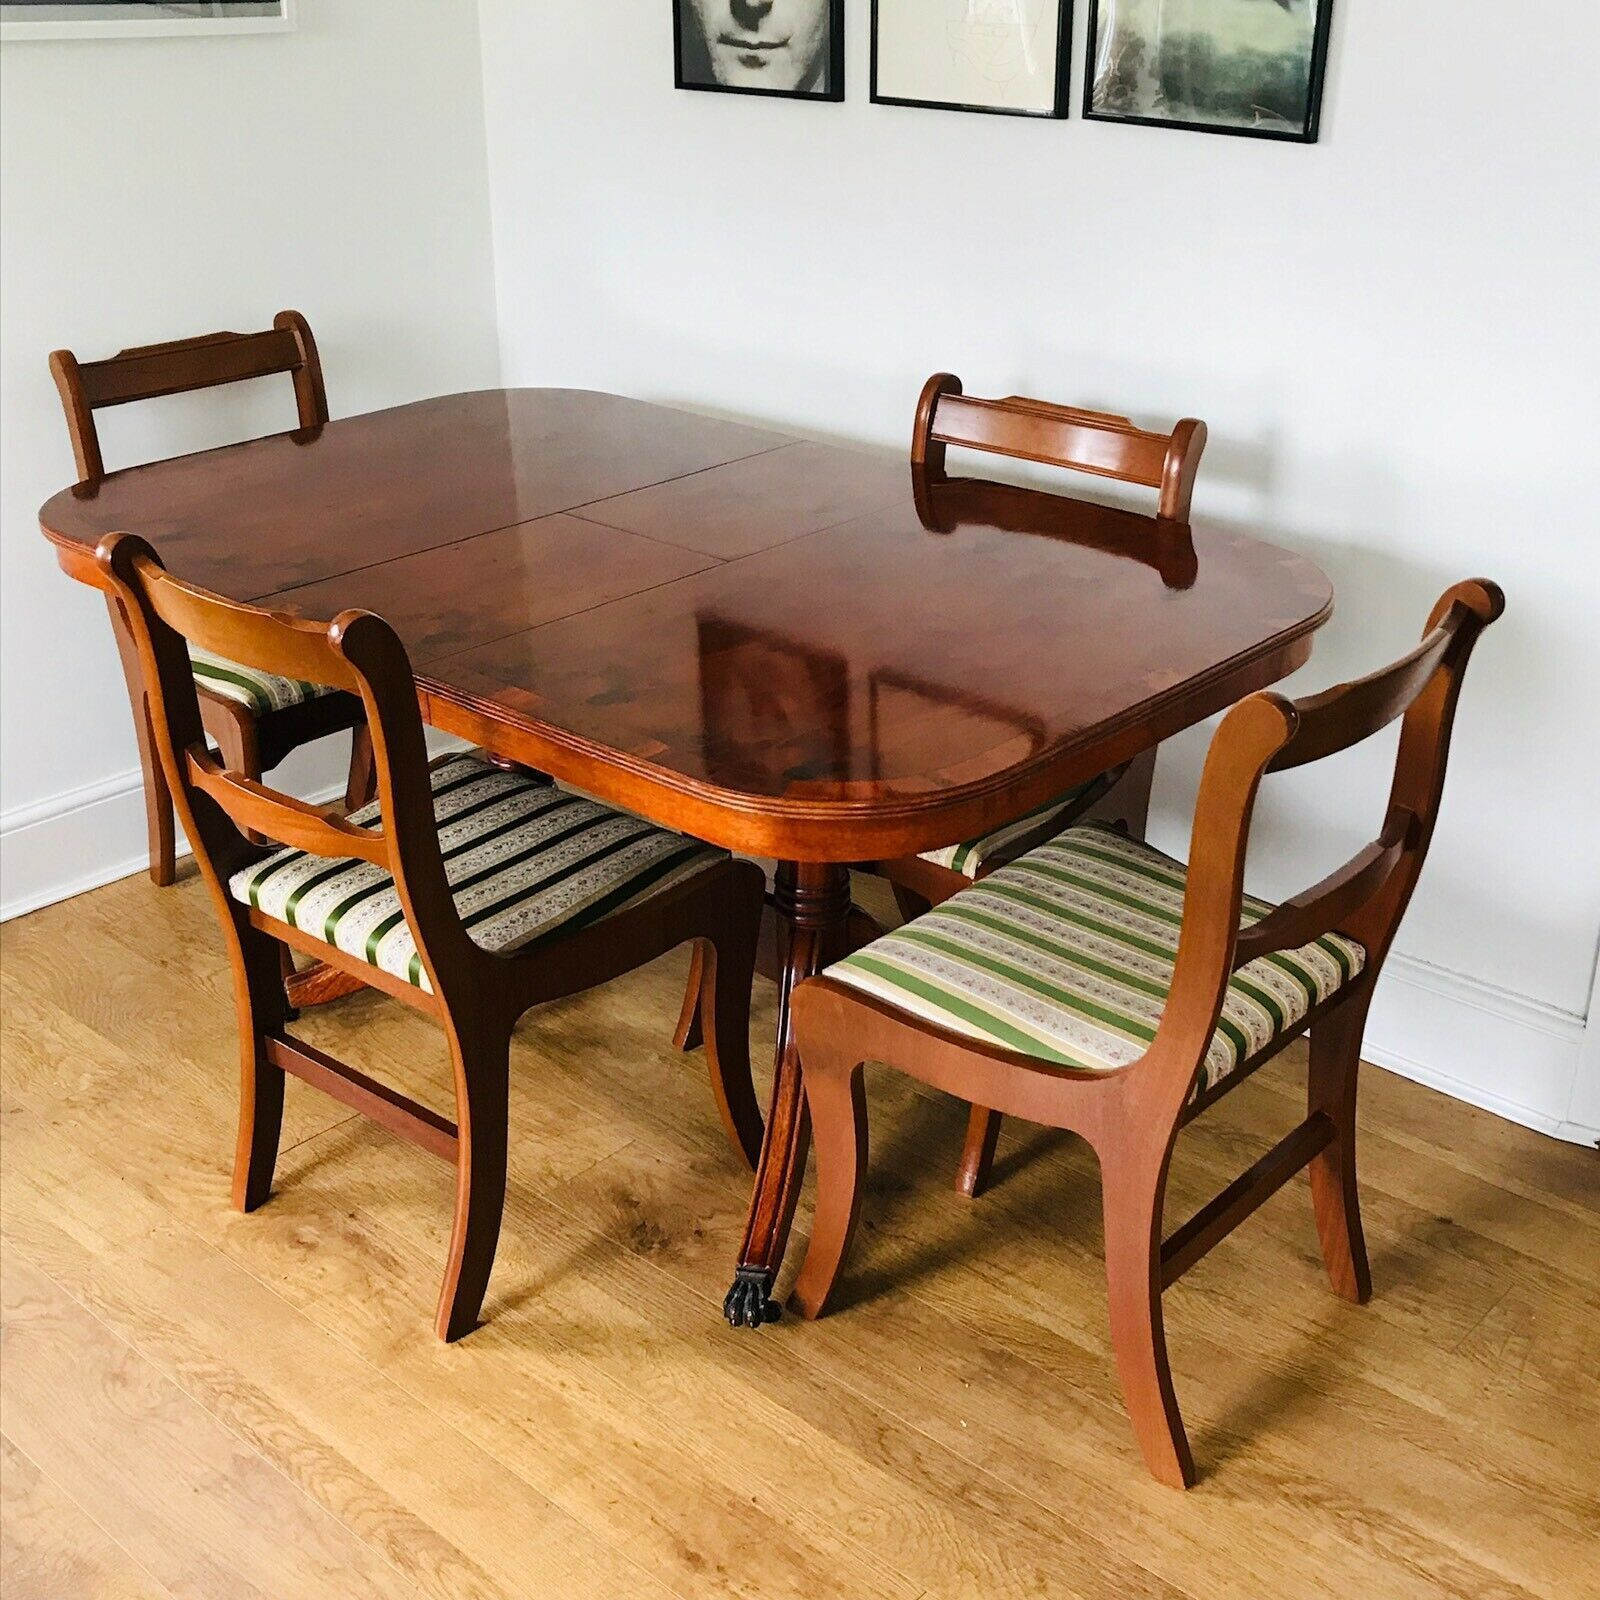 New Yew Dining Room Furniture with Simple Decor